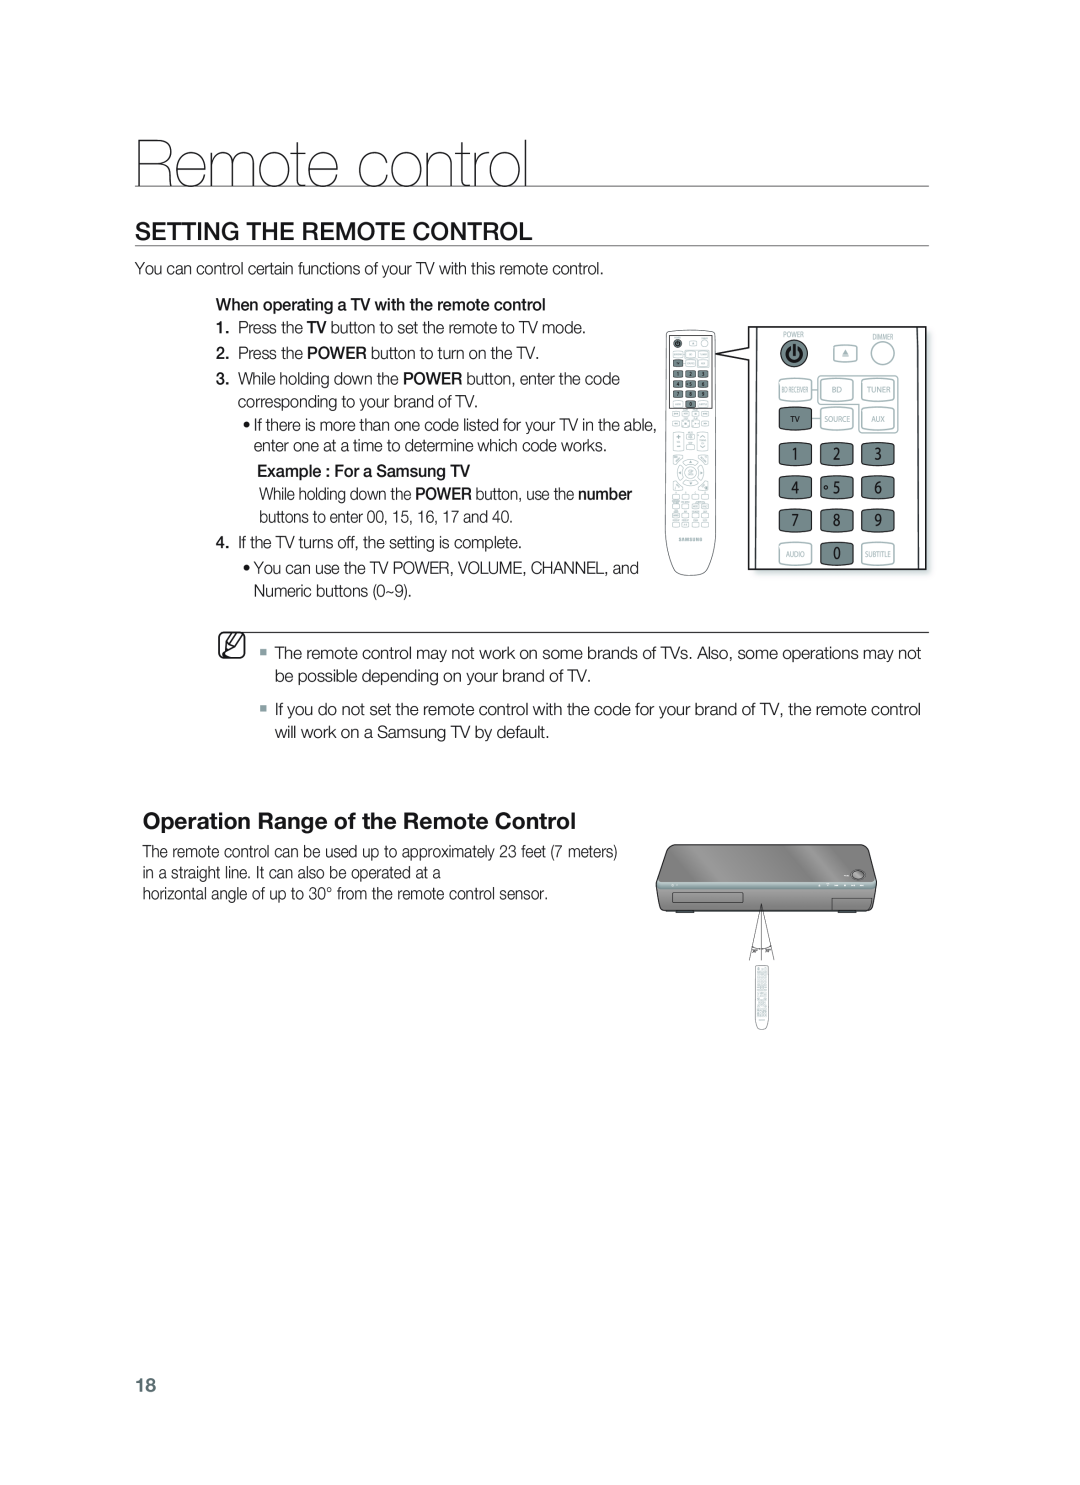 Samsung HT-BD1255, HT-BD1252 Setting The Remote Control, Operation Range of the Remote Control, Remote control, M  